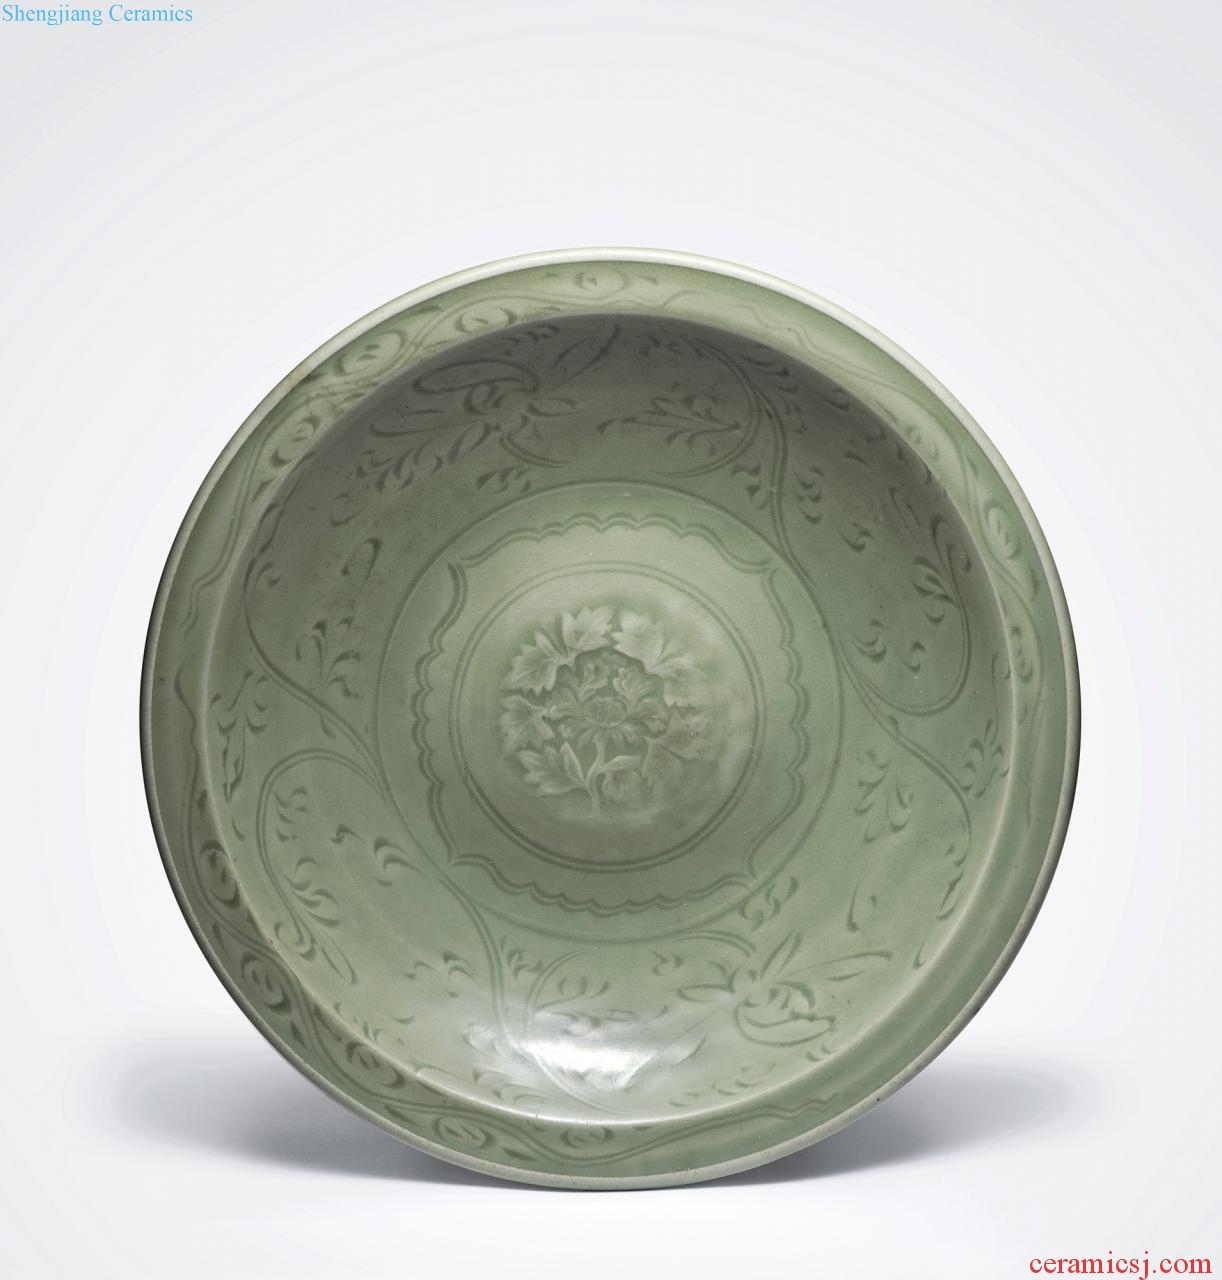 At the end of the yuan Ming Longquan celadon flower blue glaze signet fold along the plate